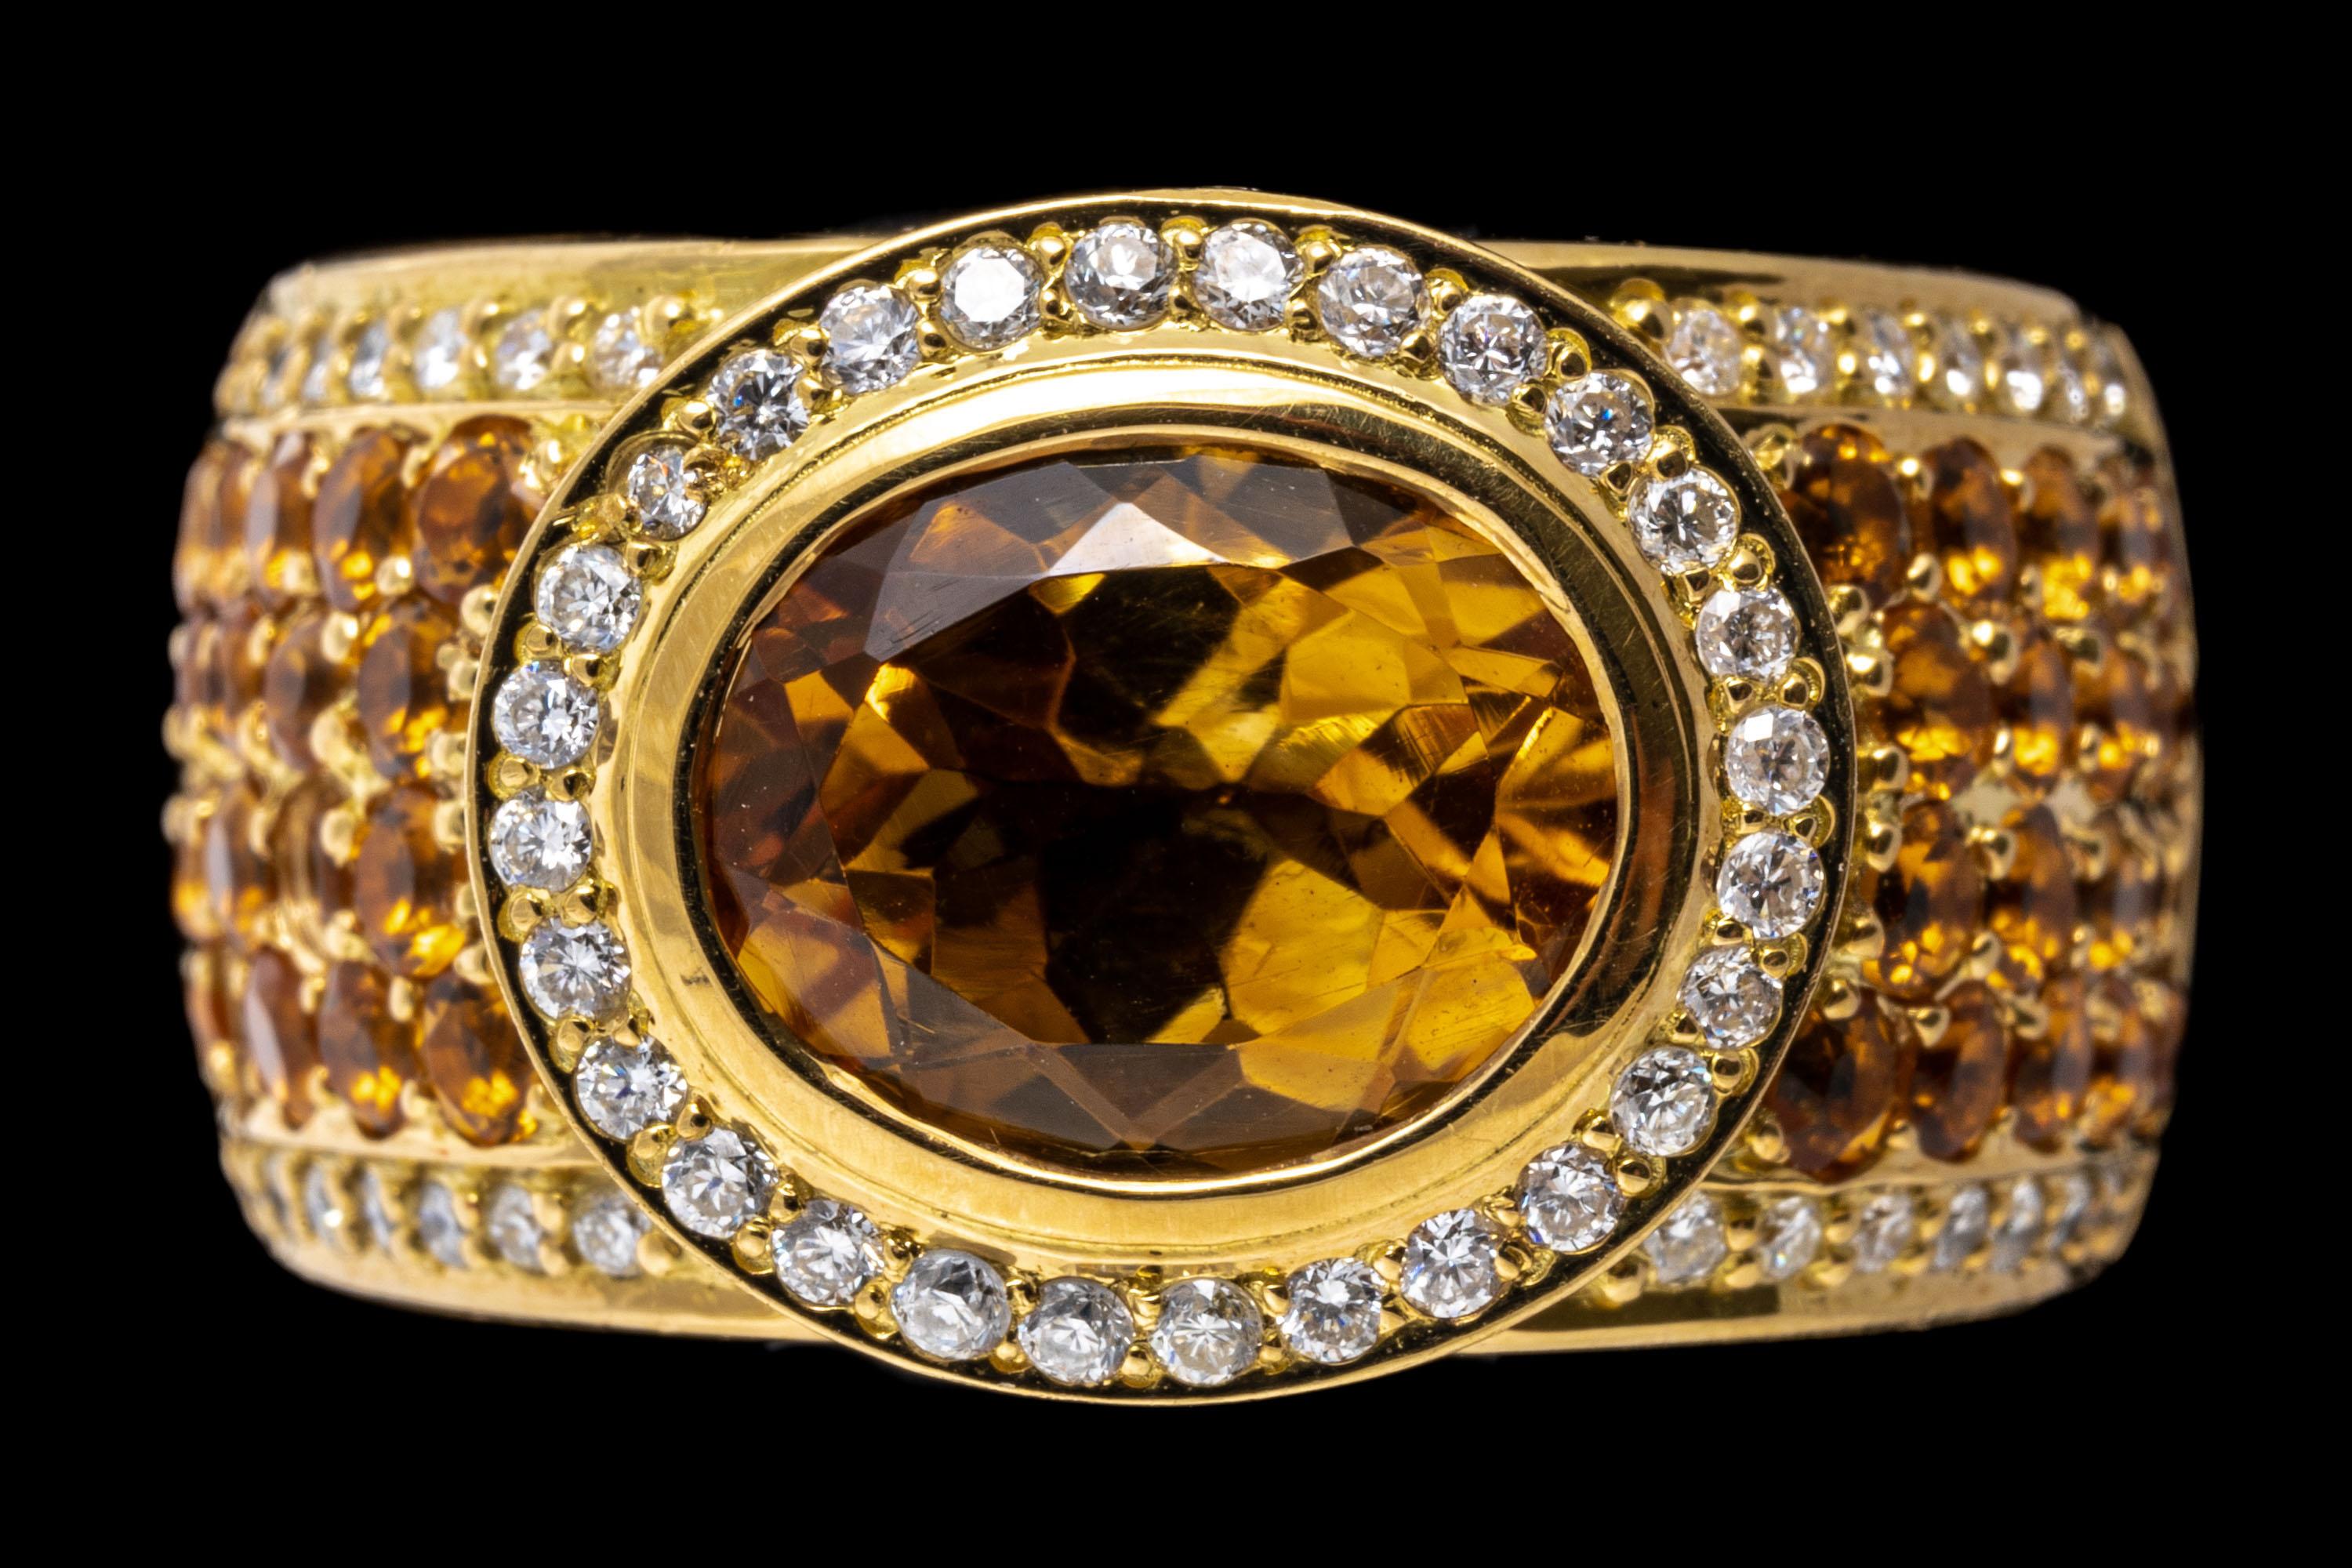 18k yellow gold ring. This gorgeous ultra wide ring is set with a center horizontal oval faceted, medium yellow orange color citrine, approximately 2.13 CT, and framed by a round faceted diamond halo. The wide shank is pave set with round faceted